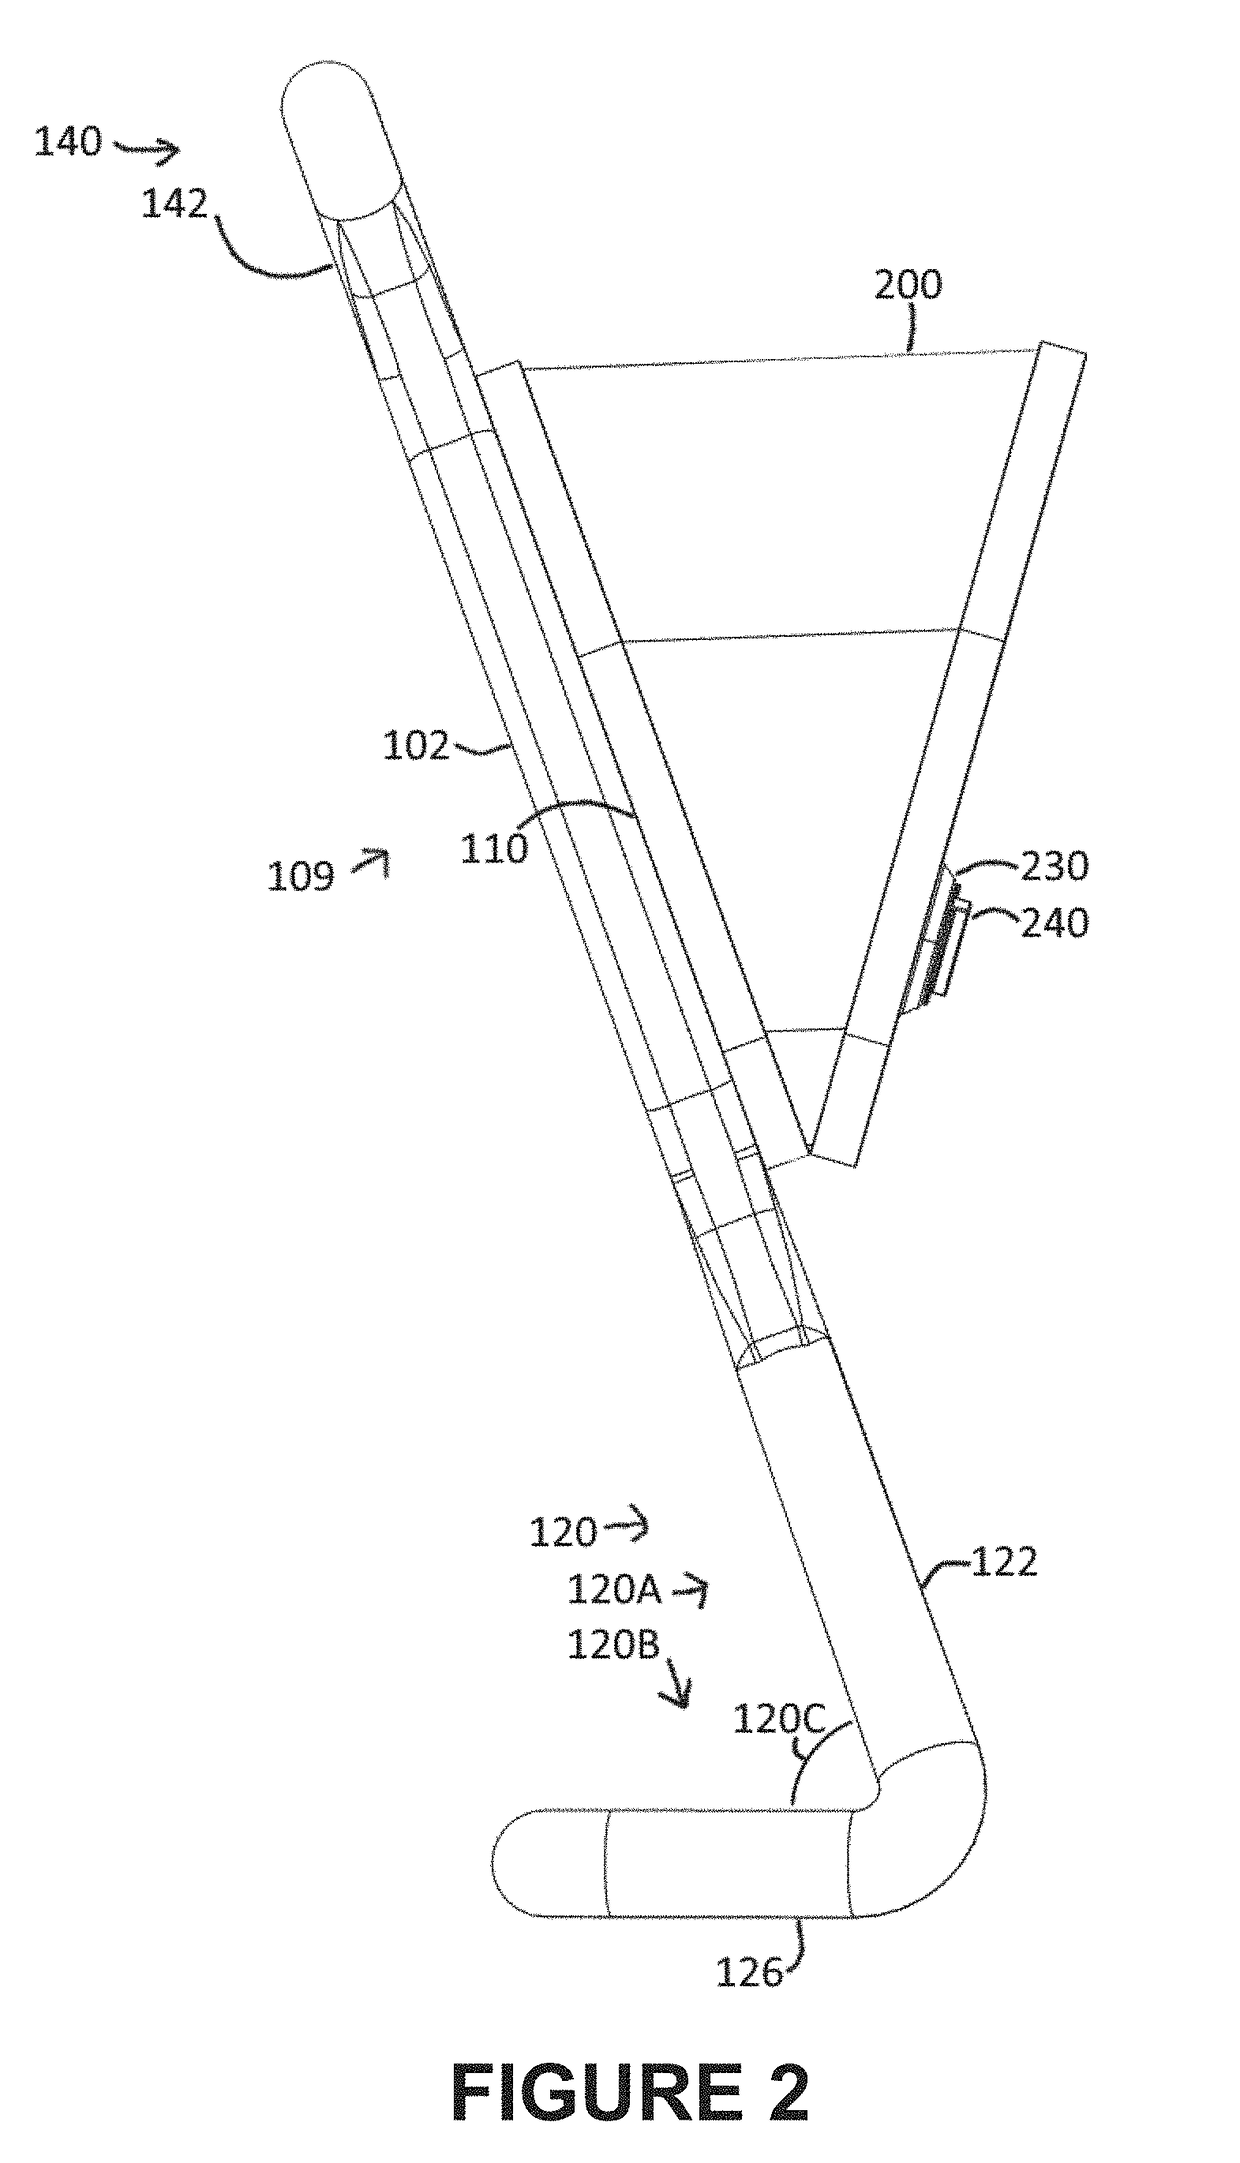 Frame for Gluteus Maximus Exercise Device